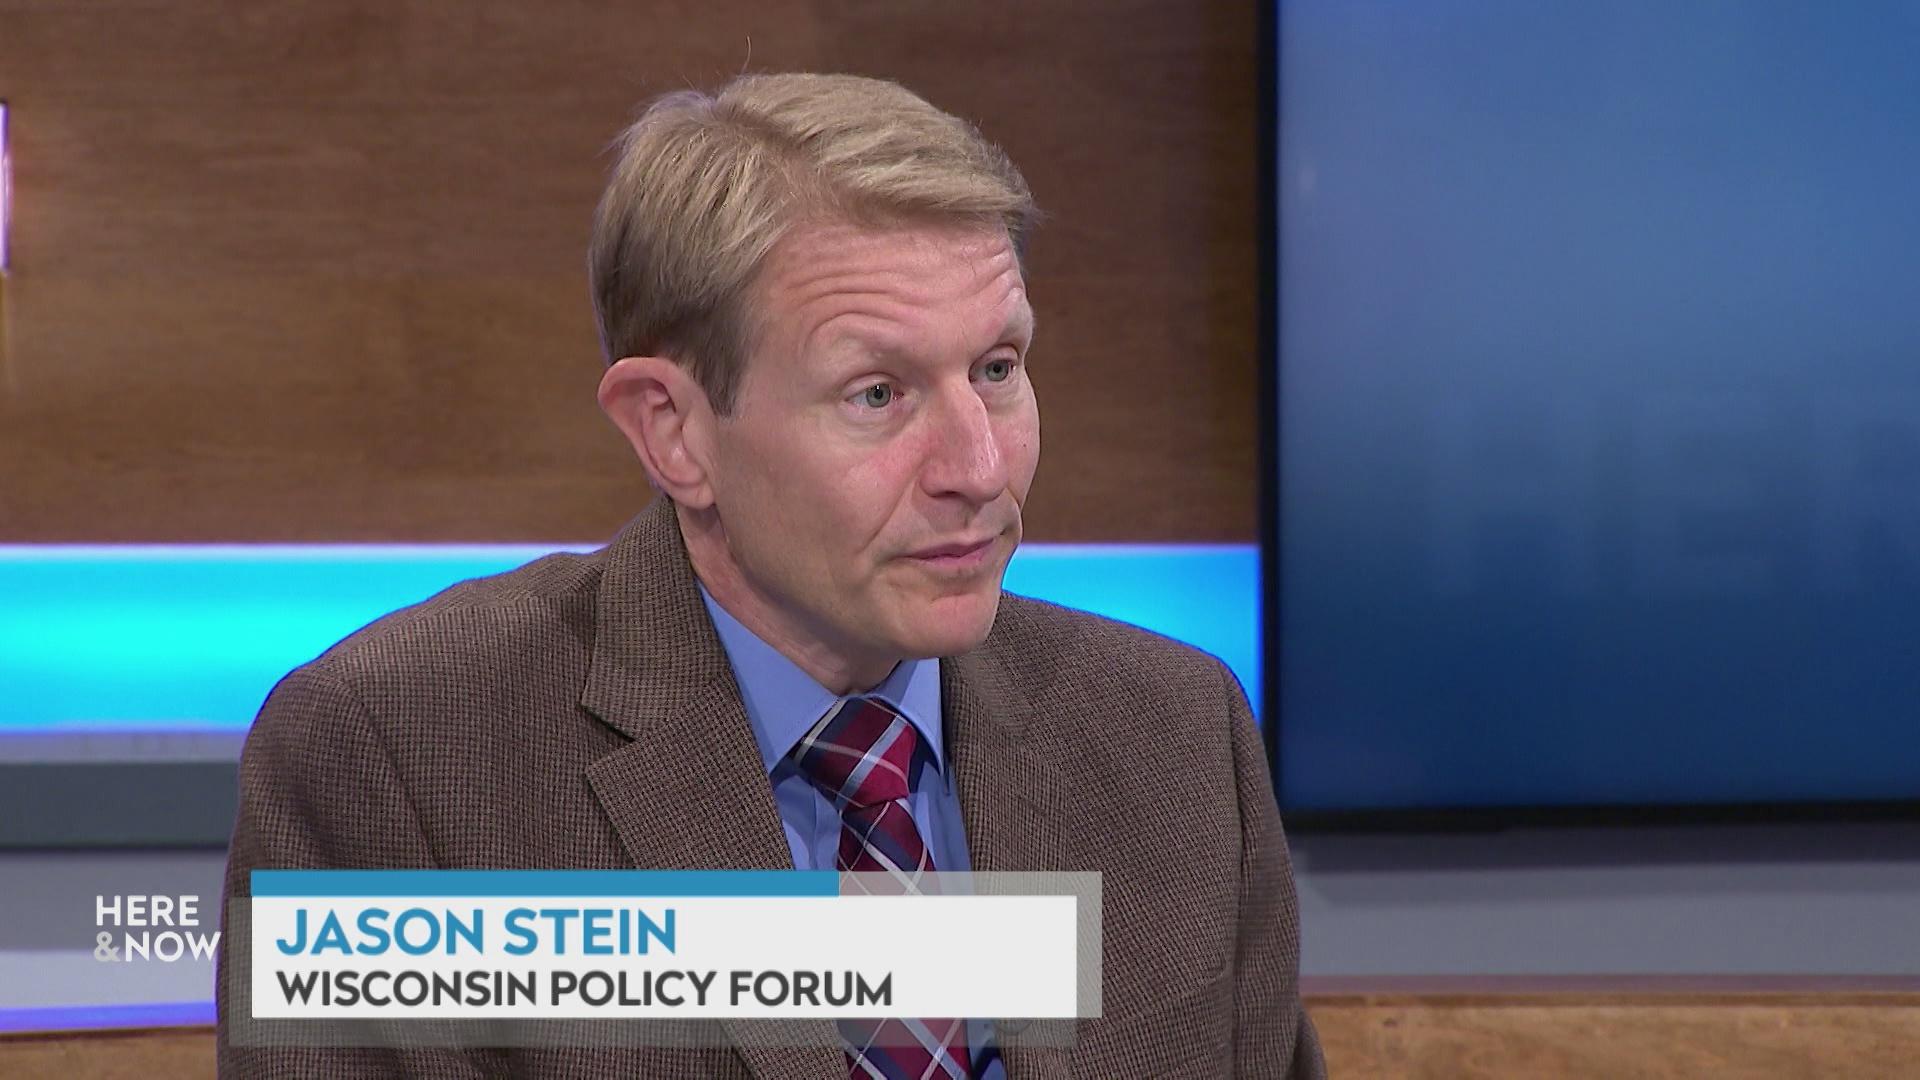 A still image shows Jason Stein seated at the 'Here & Now' set featuring wood paneling, with a graphic at bottom reading 'Jason Stein' and 'Wisconsin Policy Forum.'